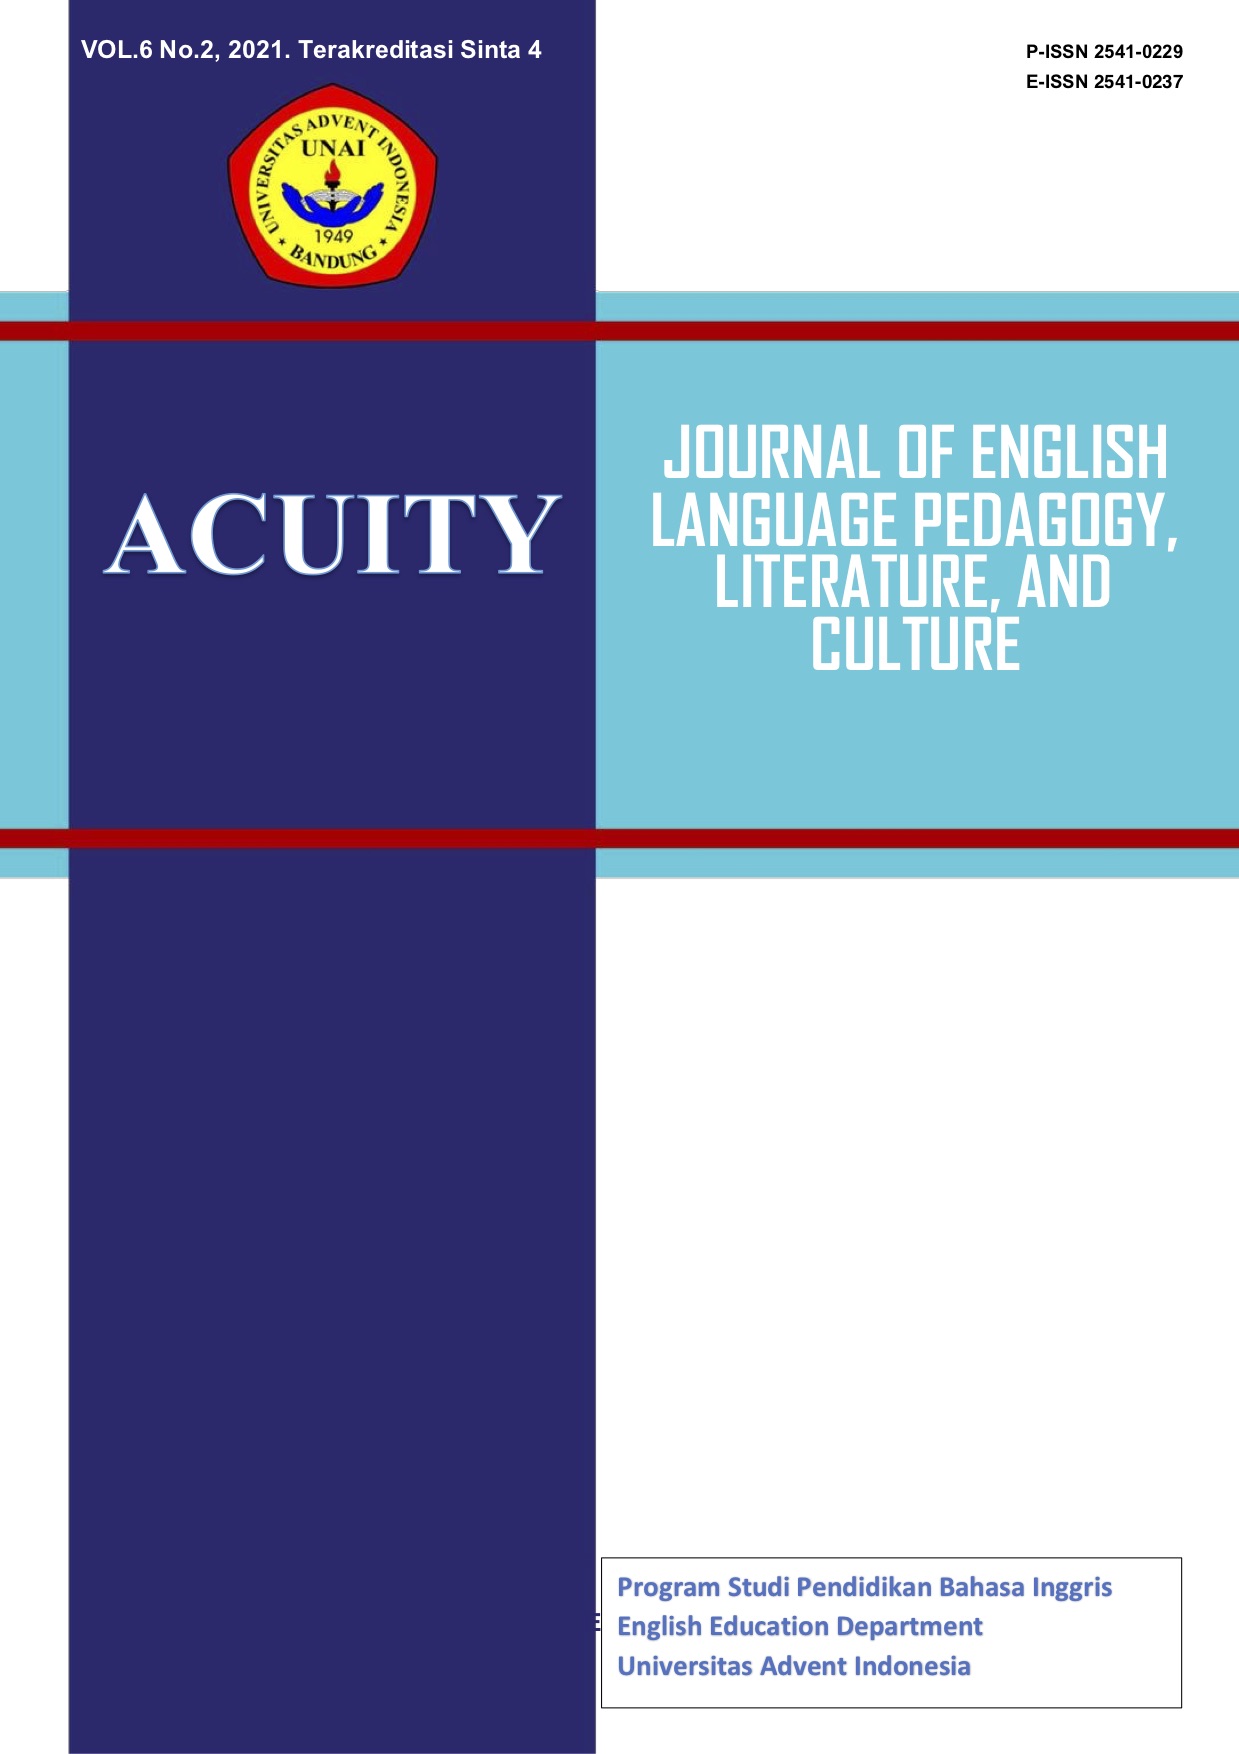 					View Vol. 6 No. 2 (2021): Acuity: Journal of English Language Pedagogy, Literature & Culture 
				